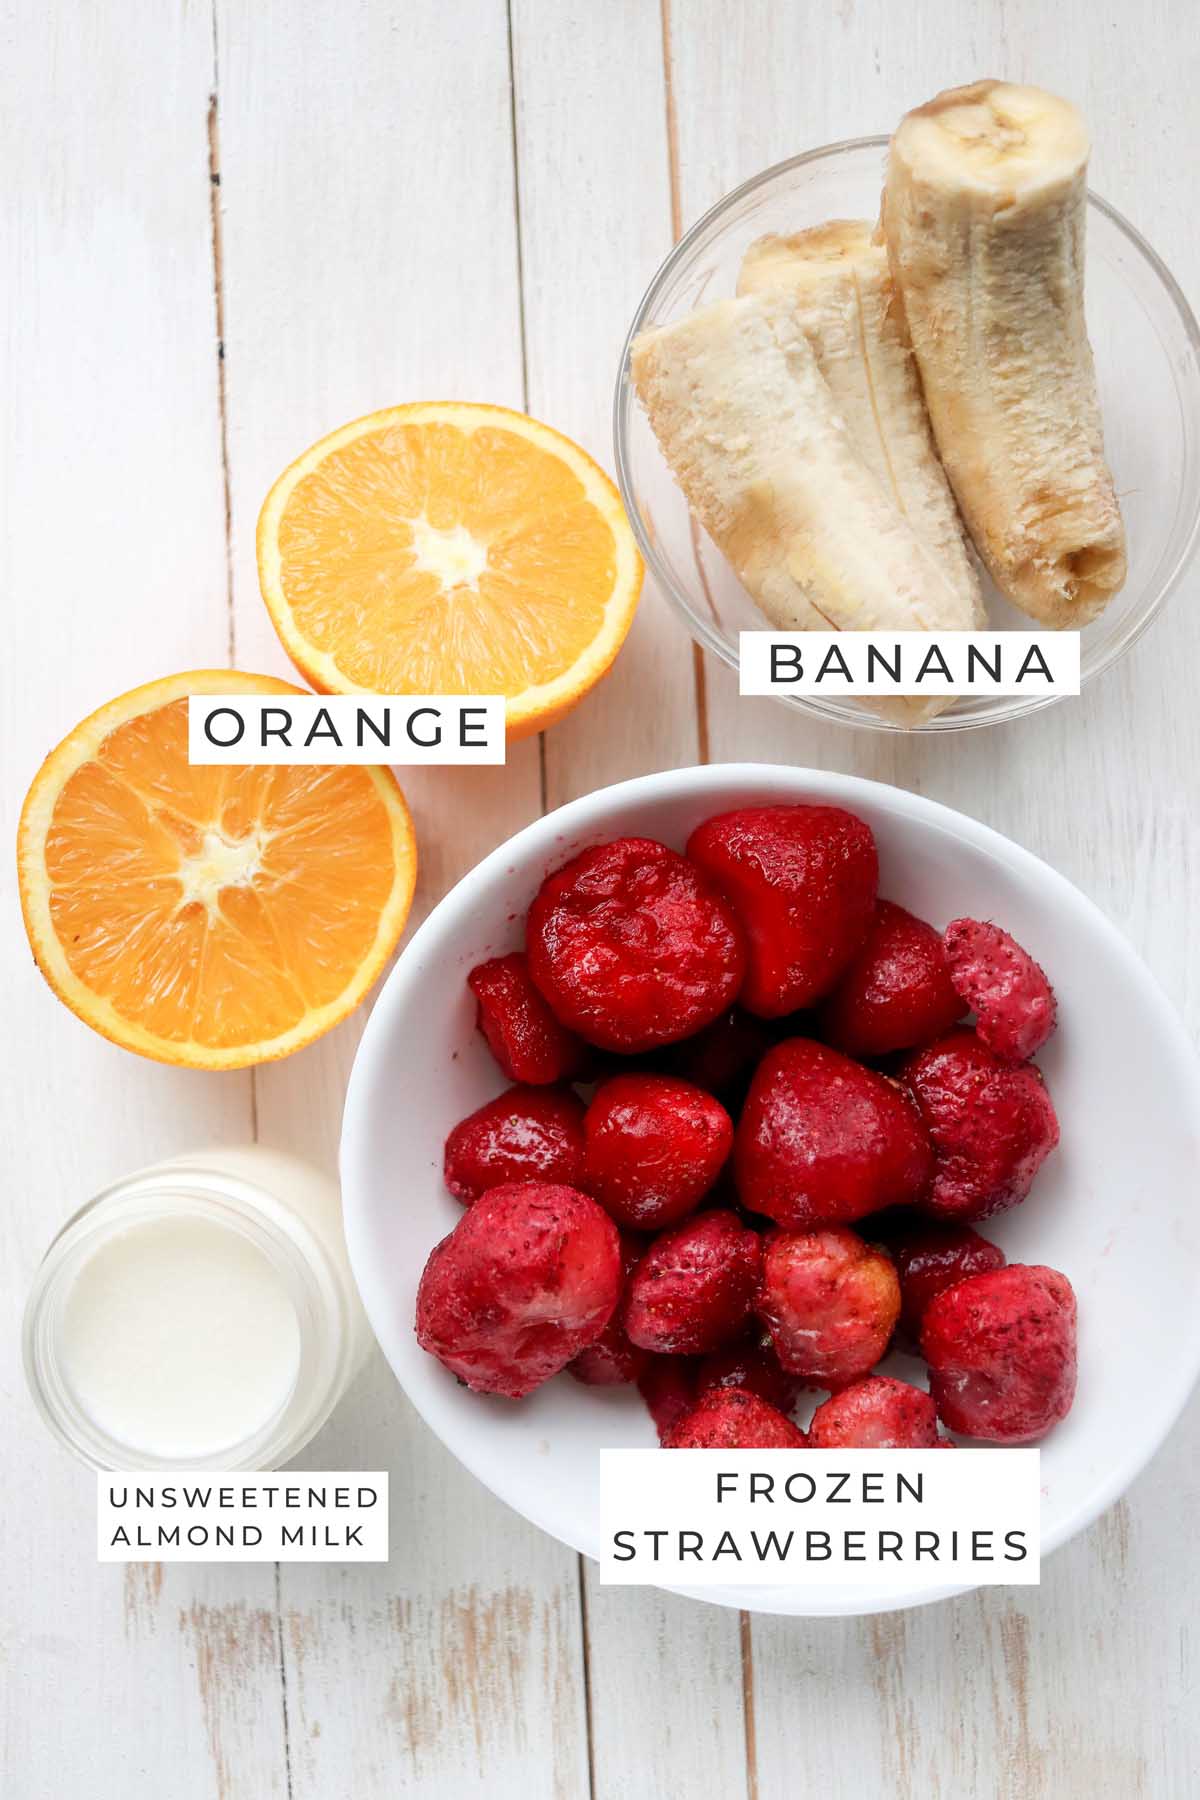 Labeled ingredients for the fruit smoothie.